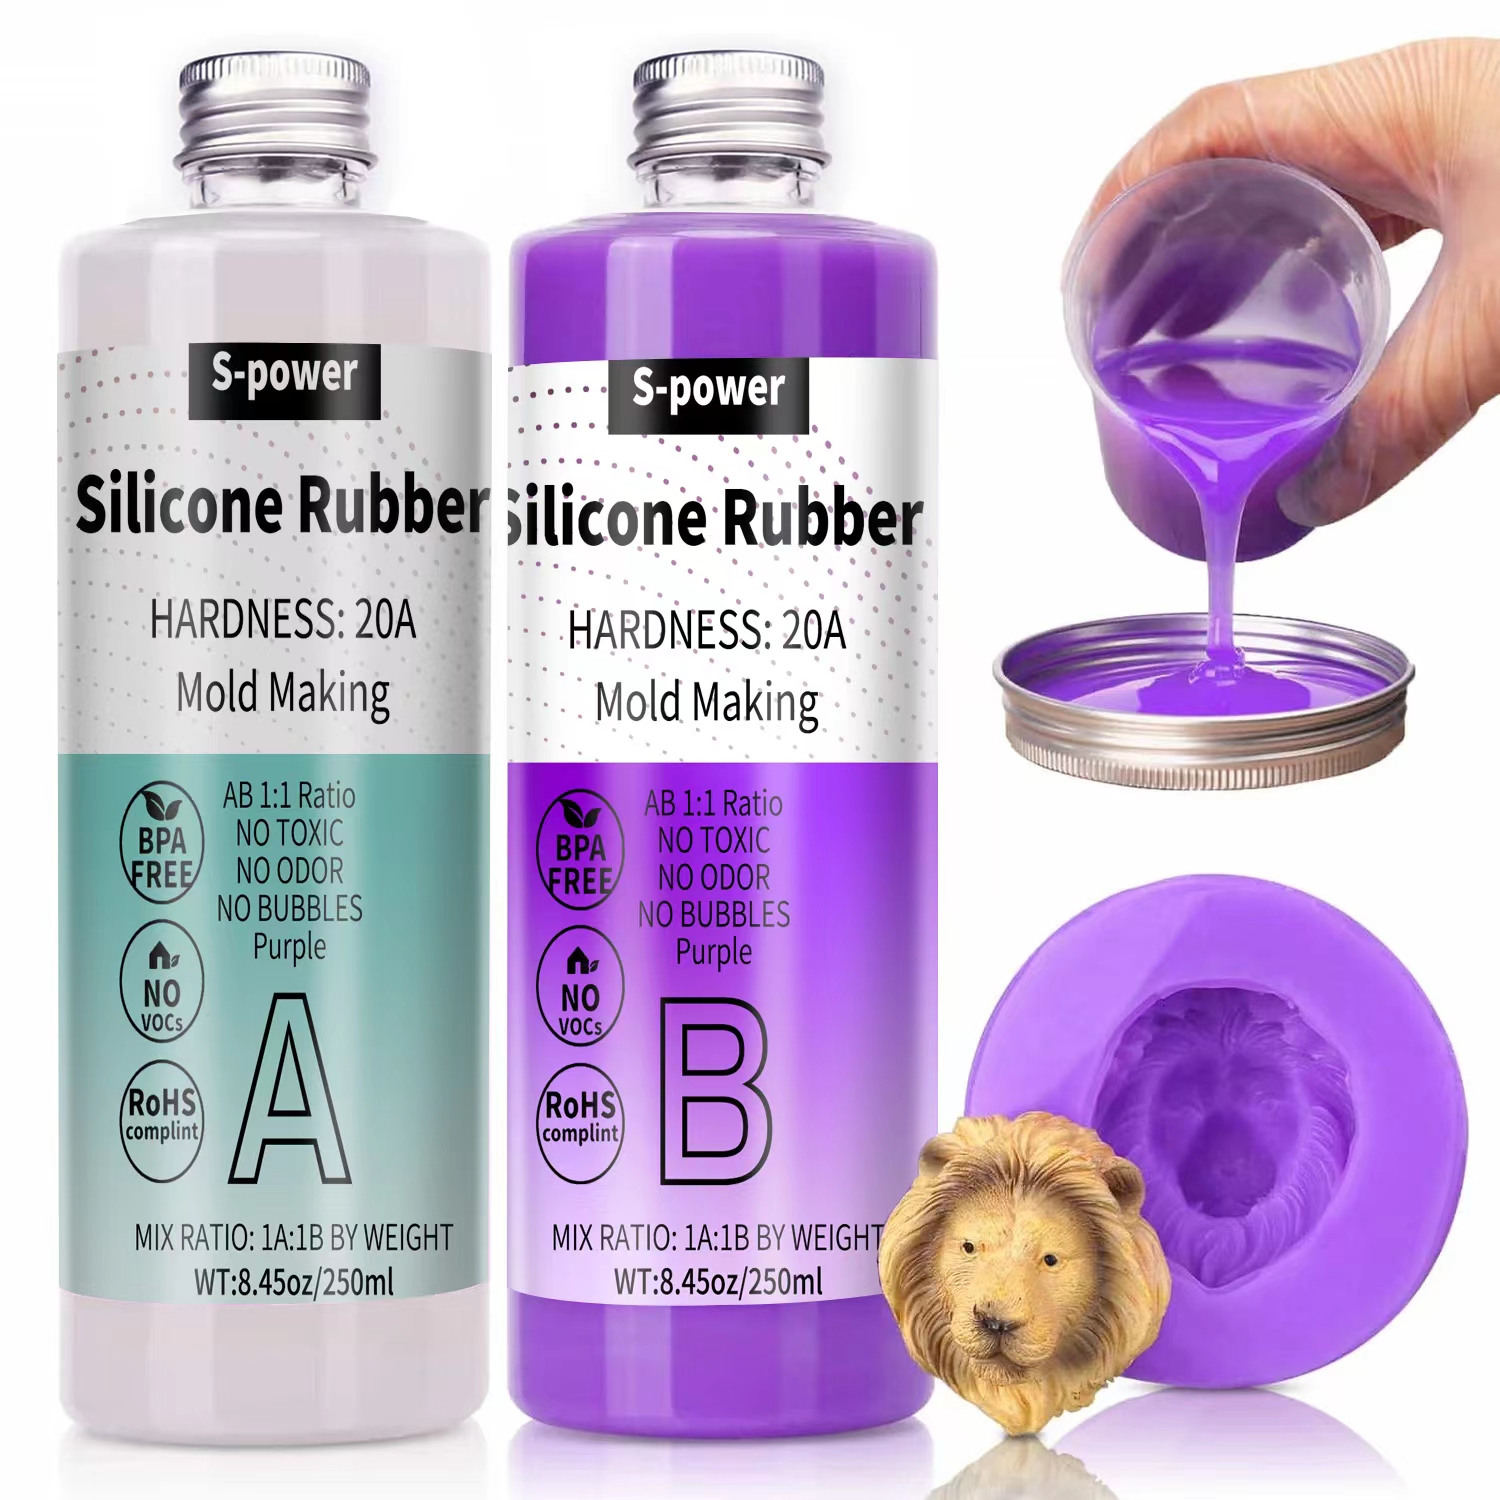 Liquid Silicone Rubber for DIY Mold Making Kit, Food Grade Purple Silicone for Make Molds AB Mixing Ratio 1:1for Chocolate Mold, Candy, Fondant, Resin, Plaster, Soap Mold Makes - (16.9oz )20A 